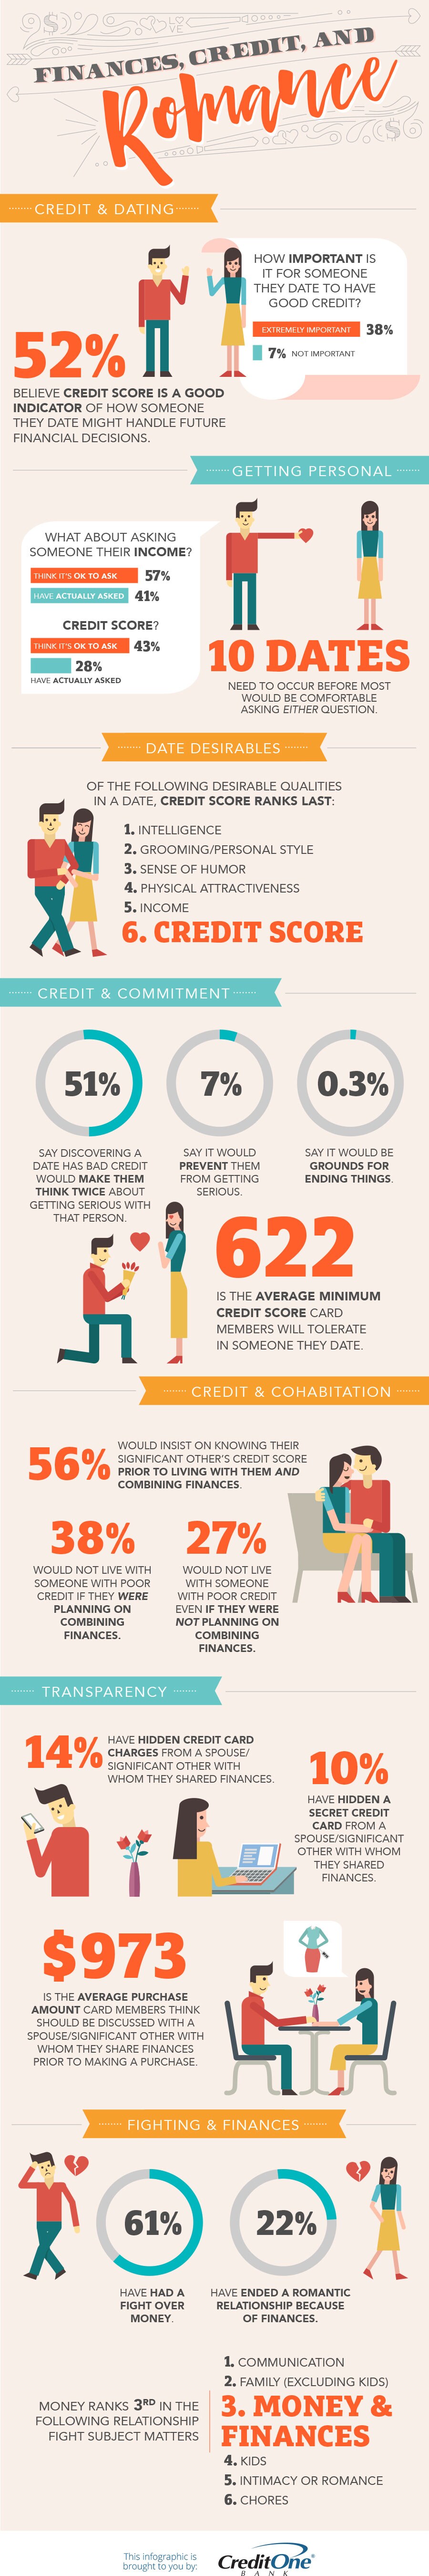 Finances, Credit and Romance Infographic